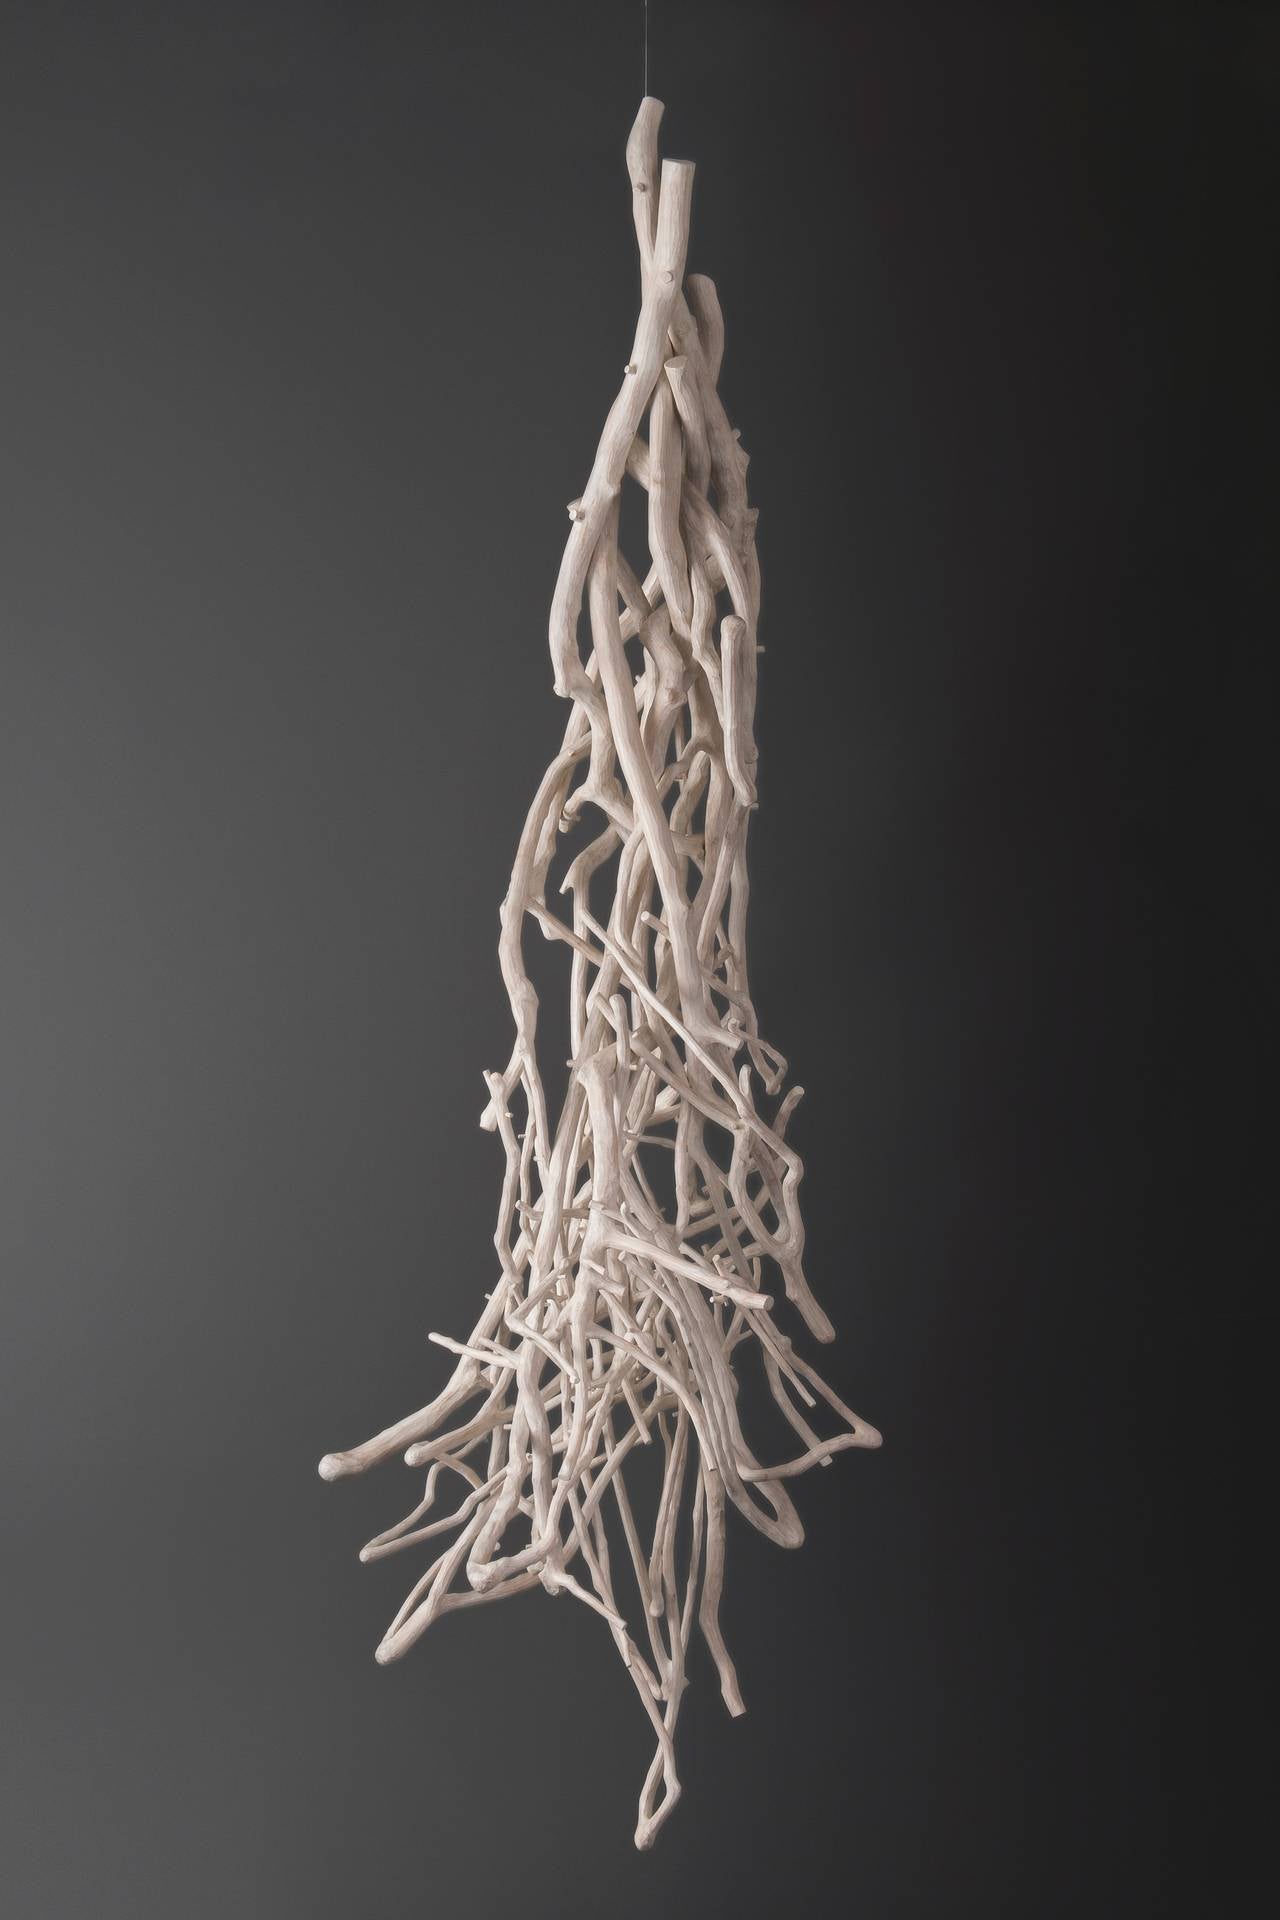 Sherry Owens Abstract Sculpture – Poised Between Death and Renewal